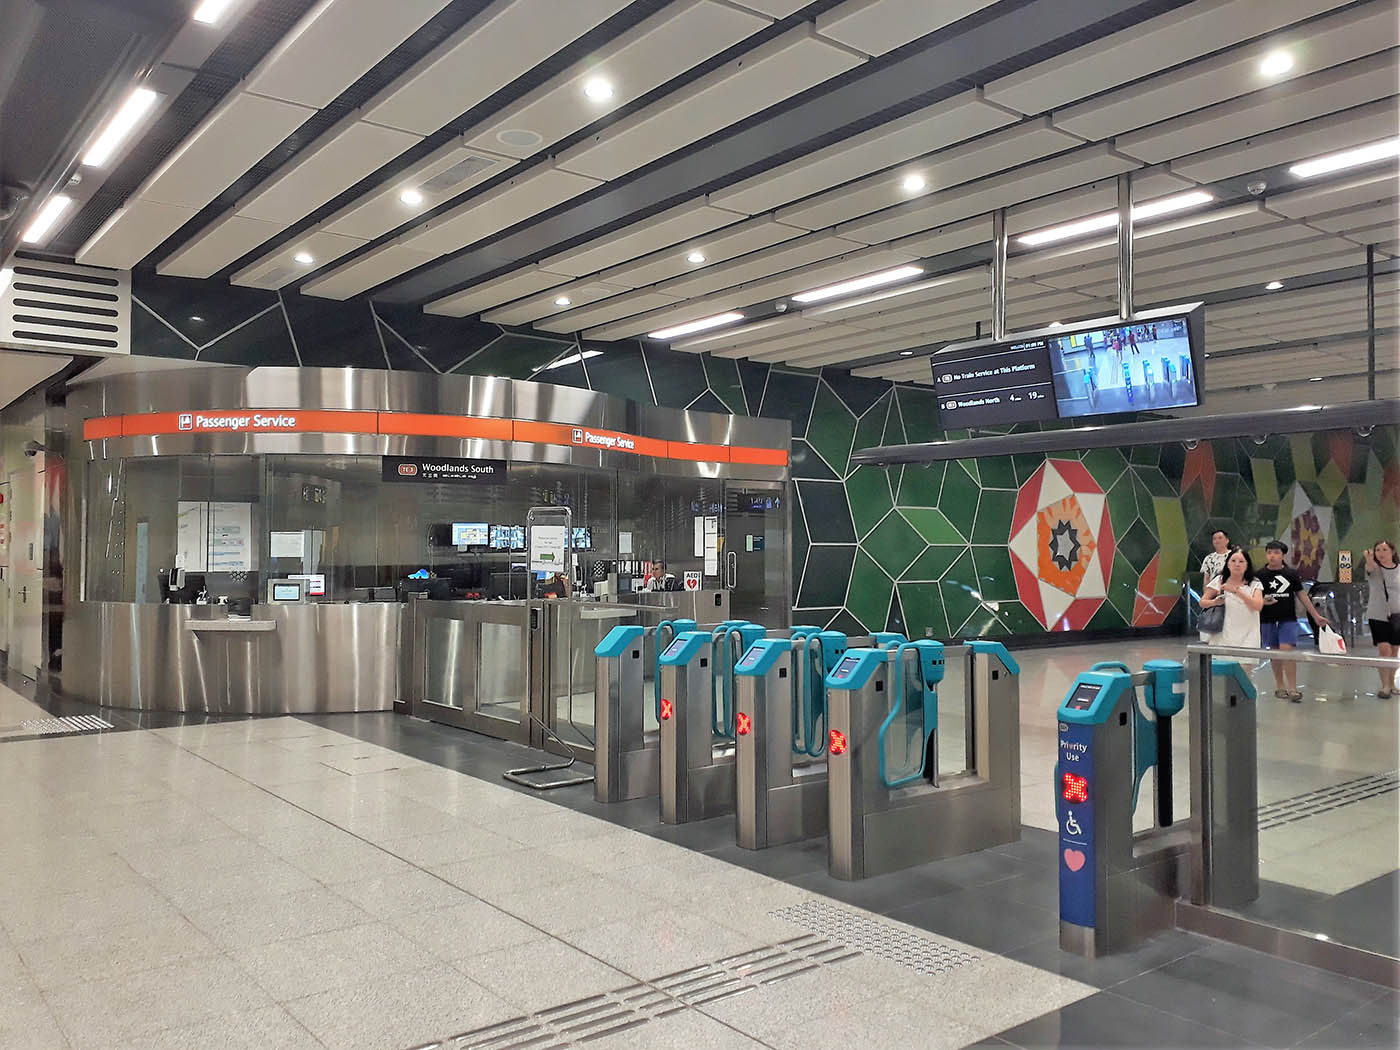 Woodlands South MRT Station - - TE3 Fare Gates And Passenger Service